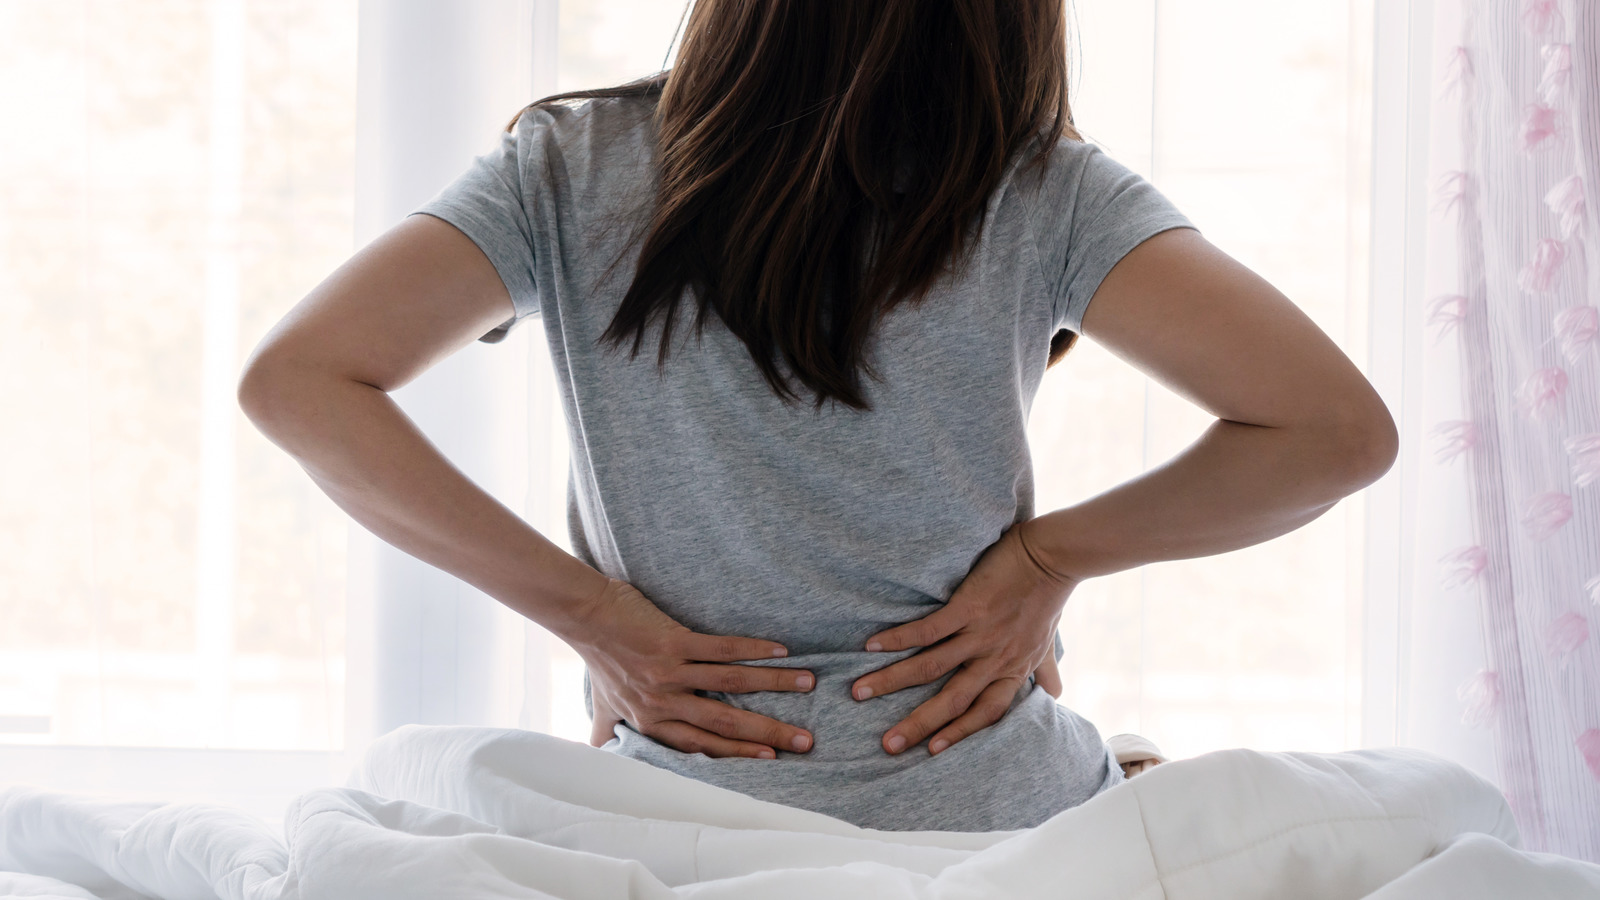 Acetaminophen may do little for acute back pain - Harvard Health